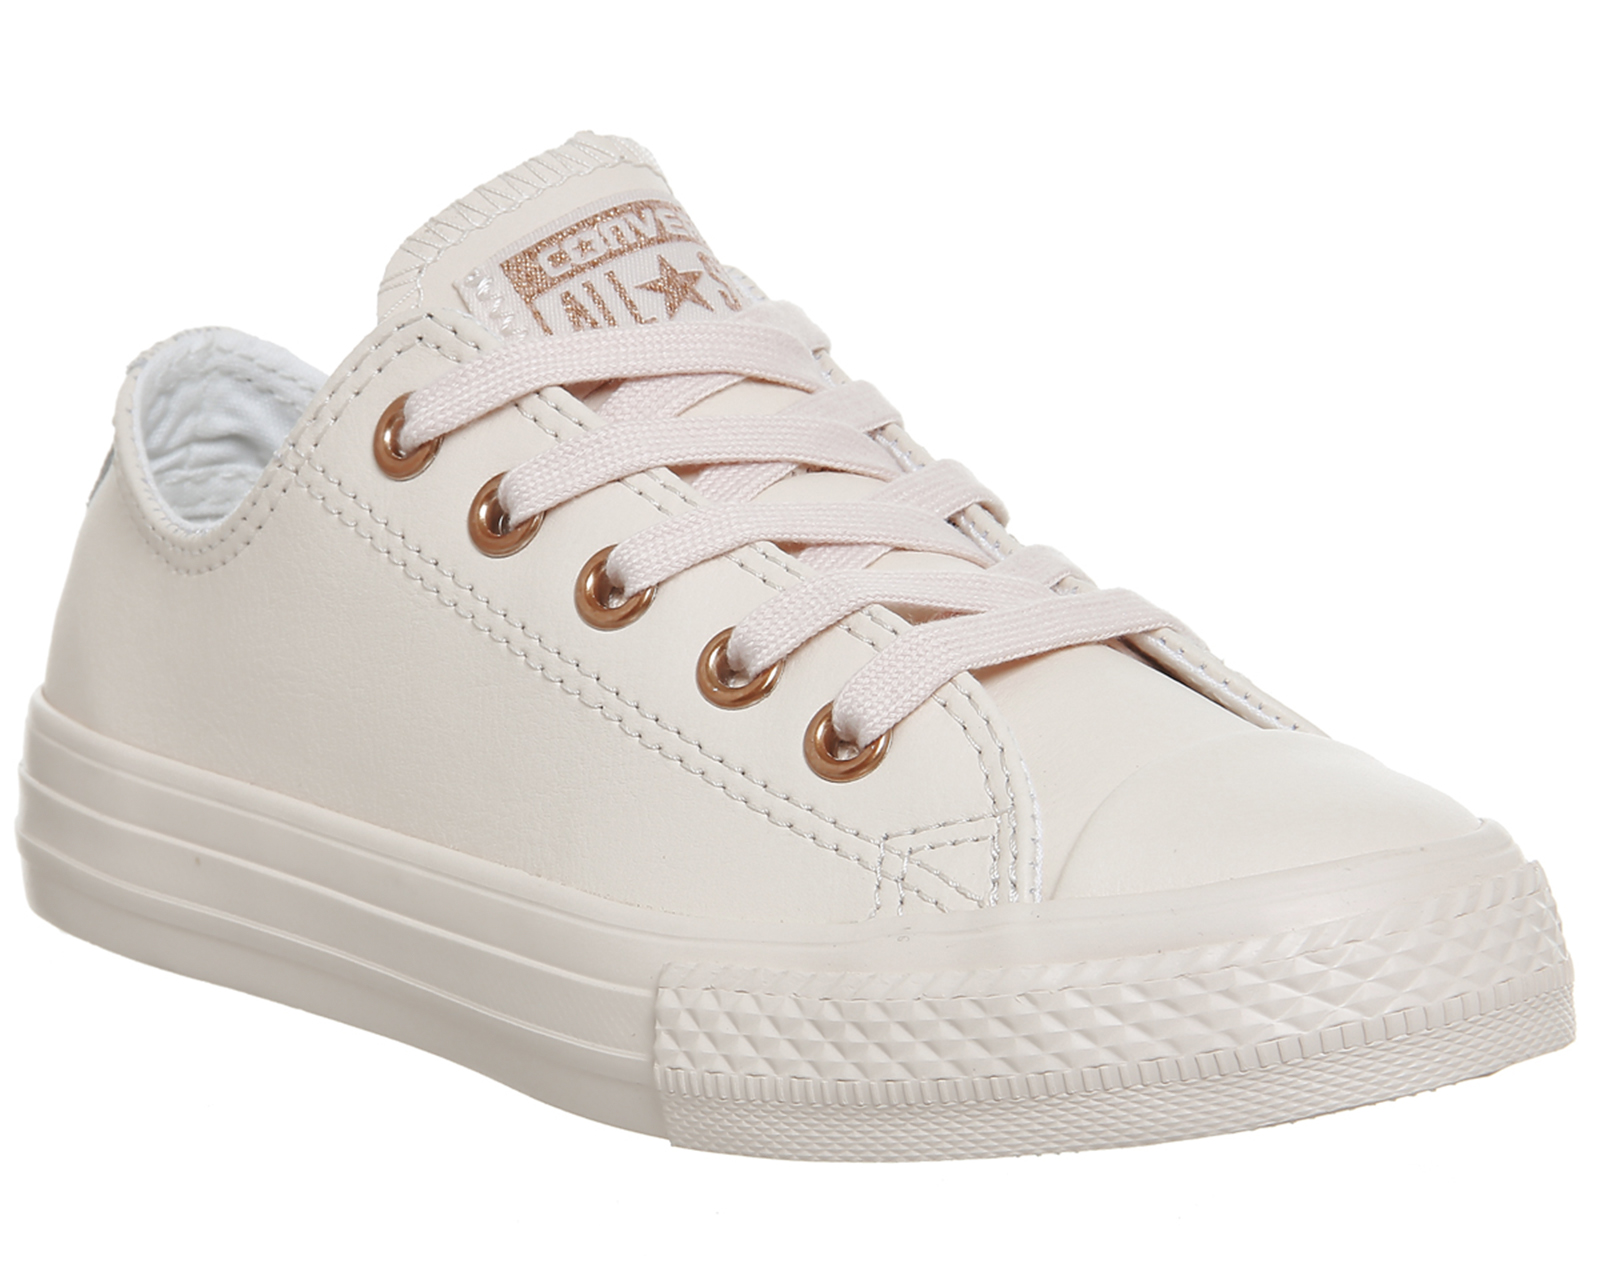 Converse All Star Ox Leather Kids Pastel Rose Gold Exclusive - Unisex